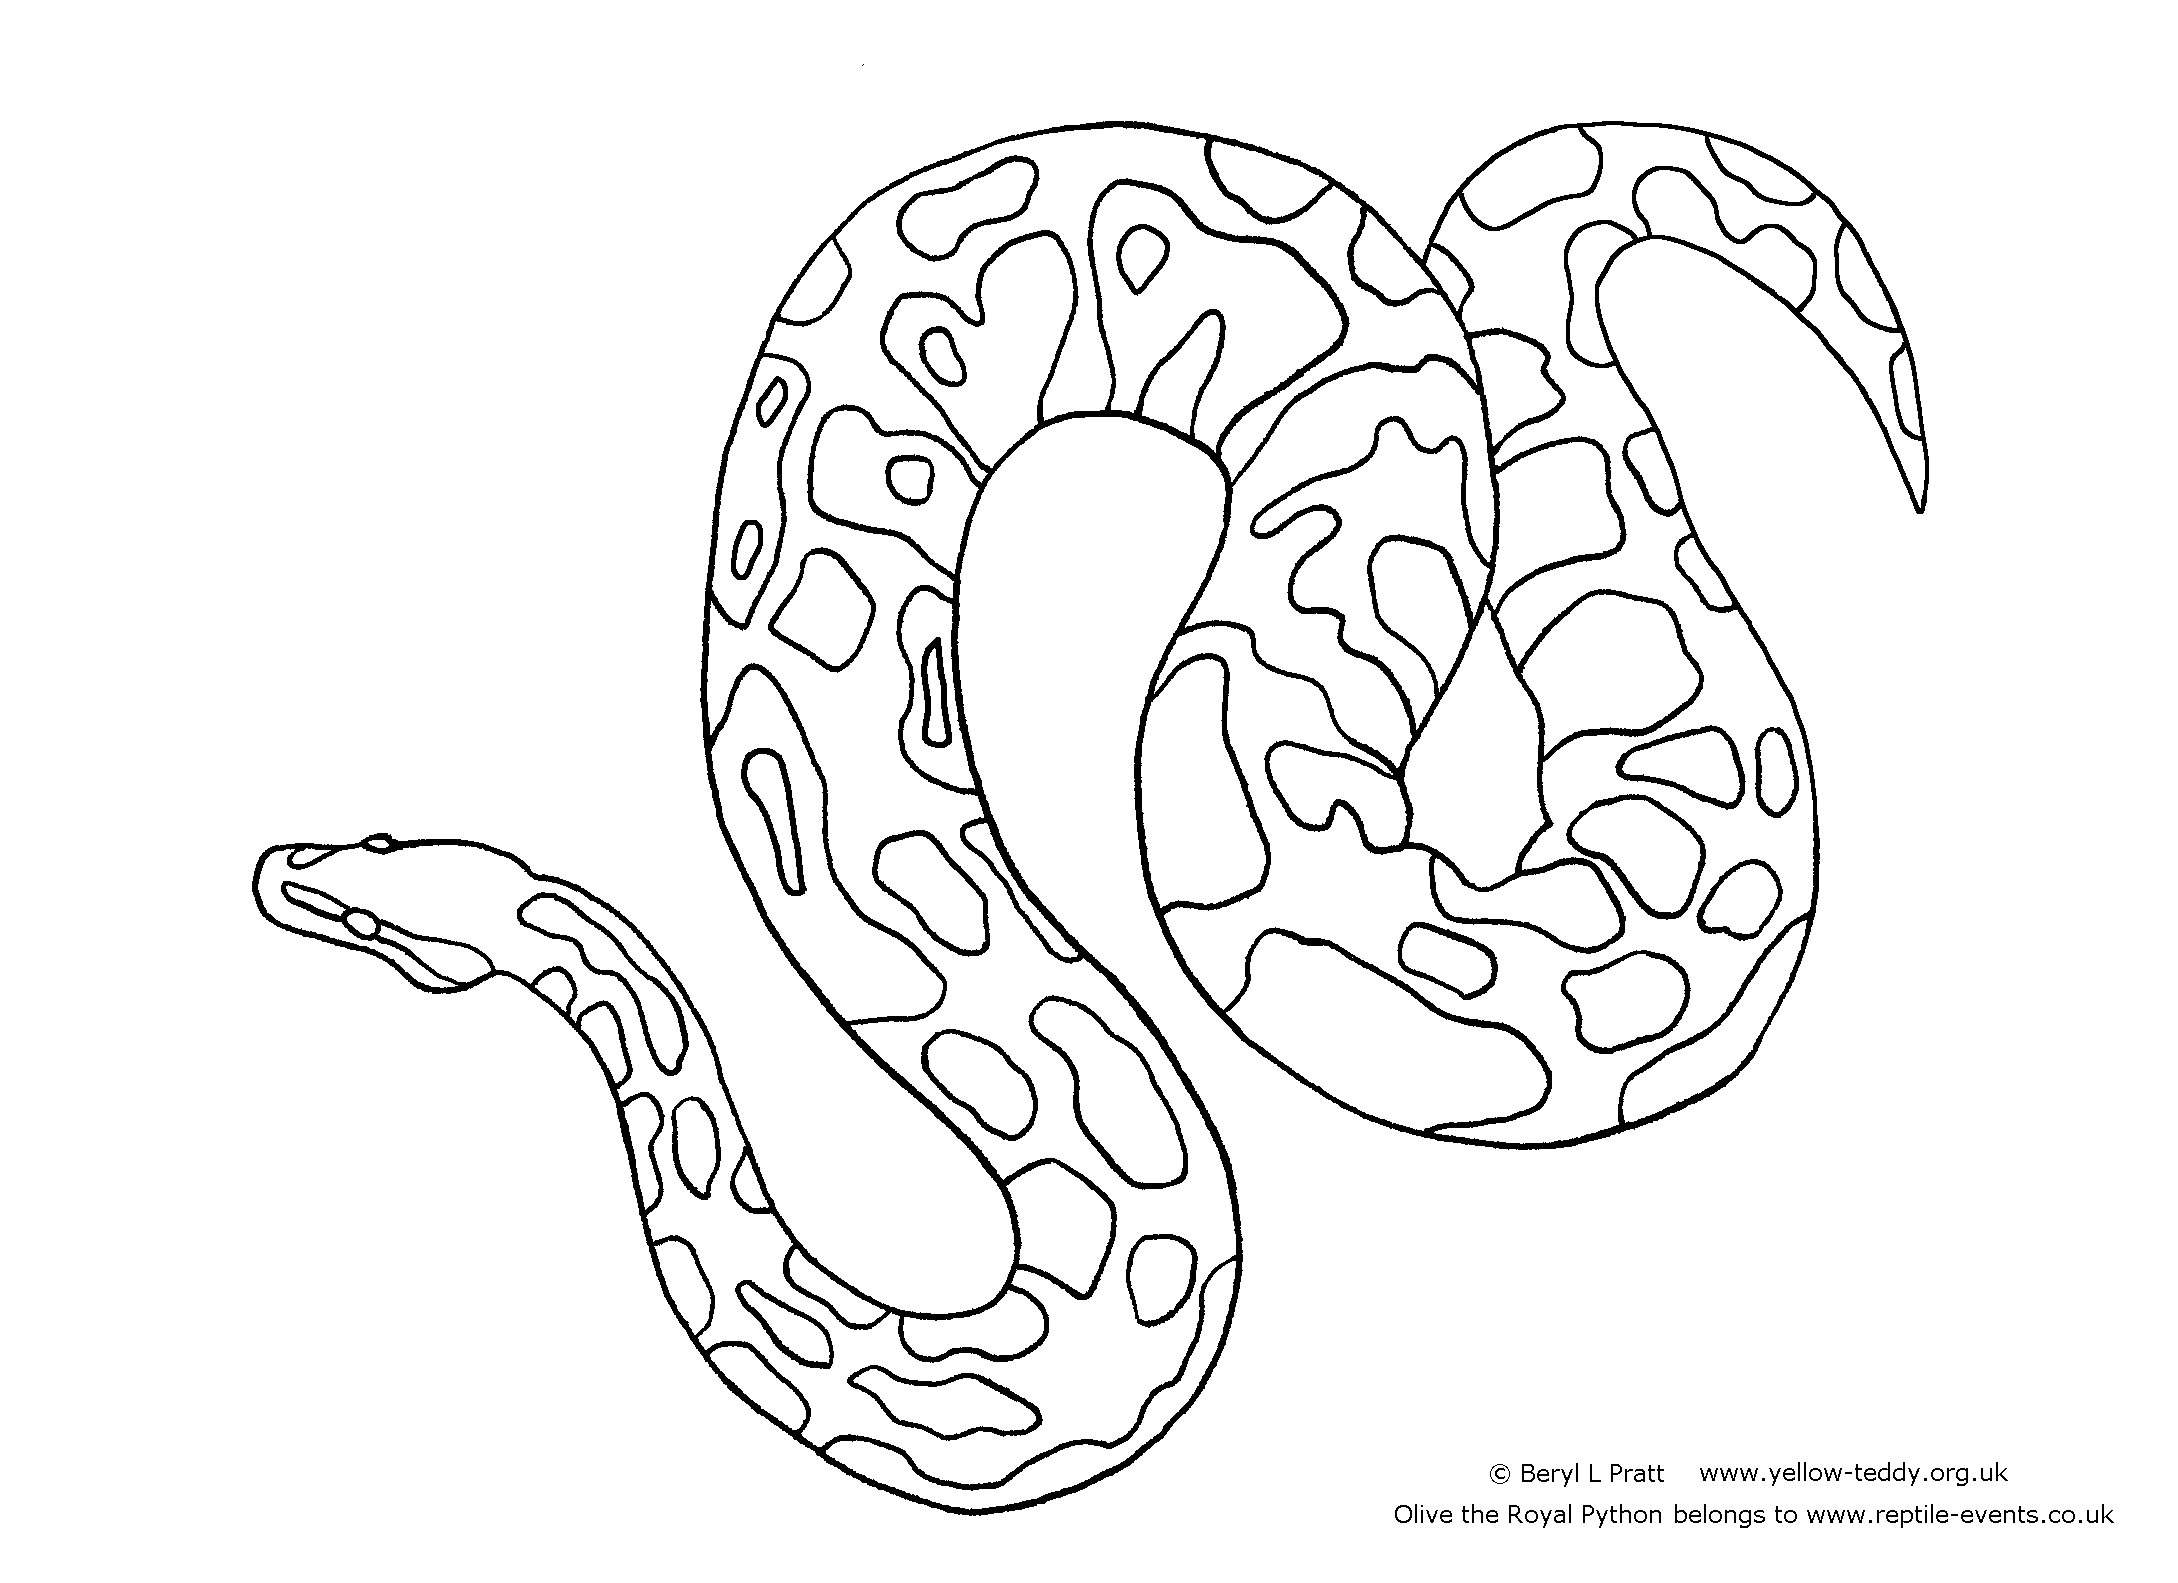 Ball Python Coloring Drawings: Ball Python Coloring Pages,